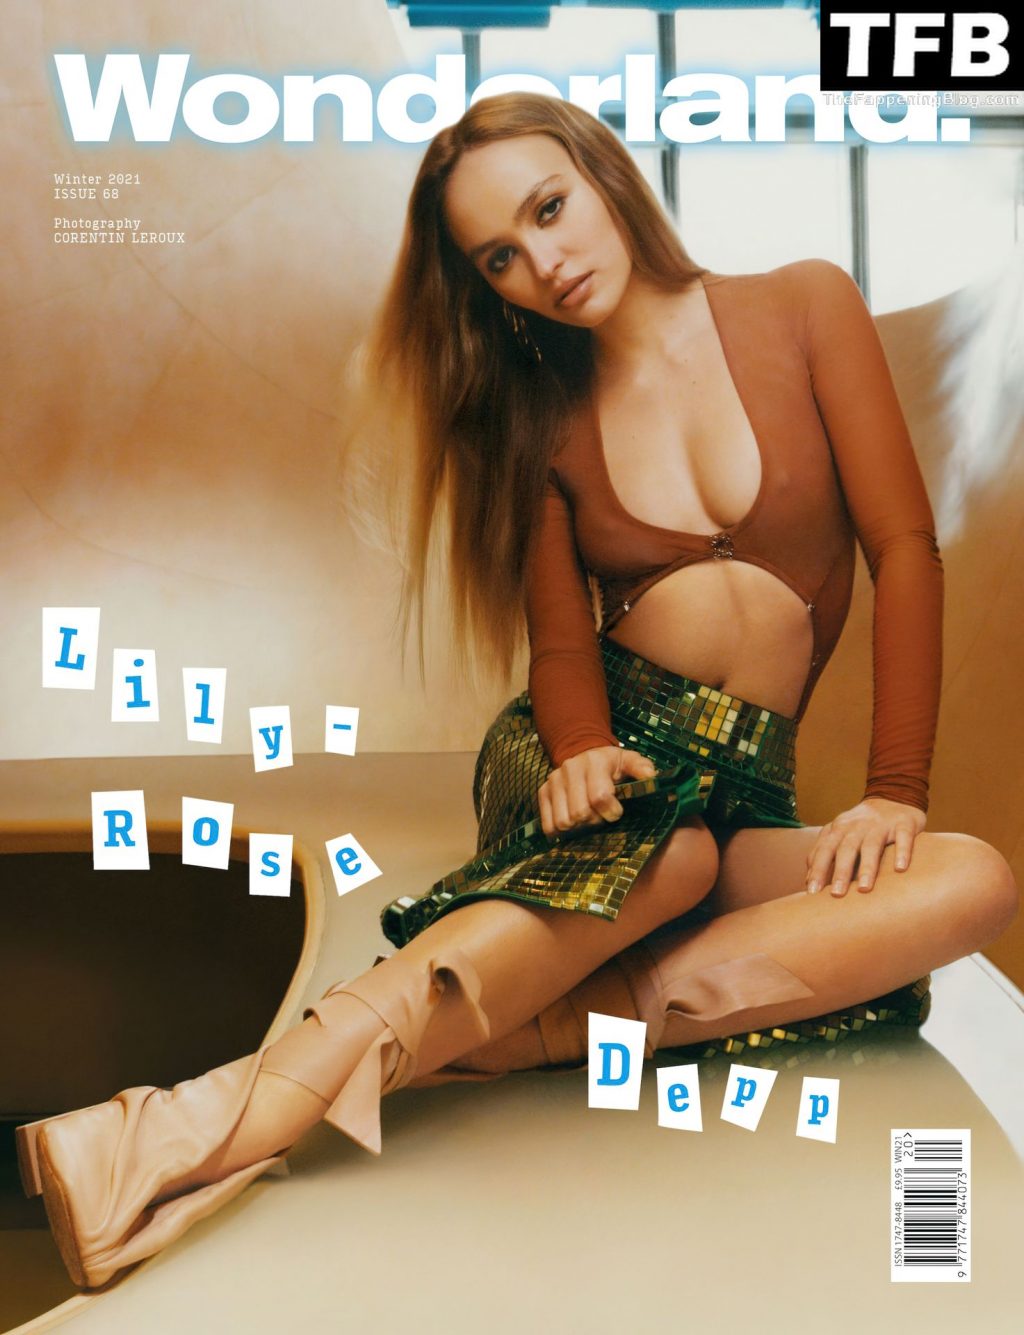 Lily-Rose Depp Shows Off Her Beautiful Body For Wonderland Magazine Winter 2021 Issue (9 Photos)